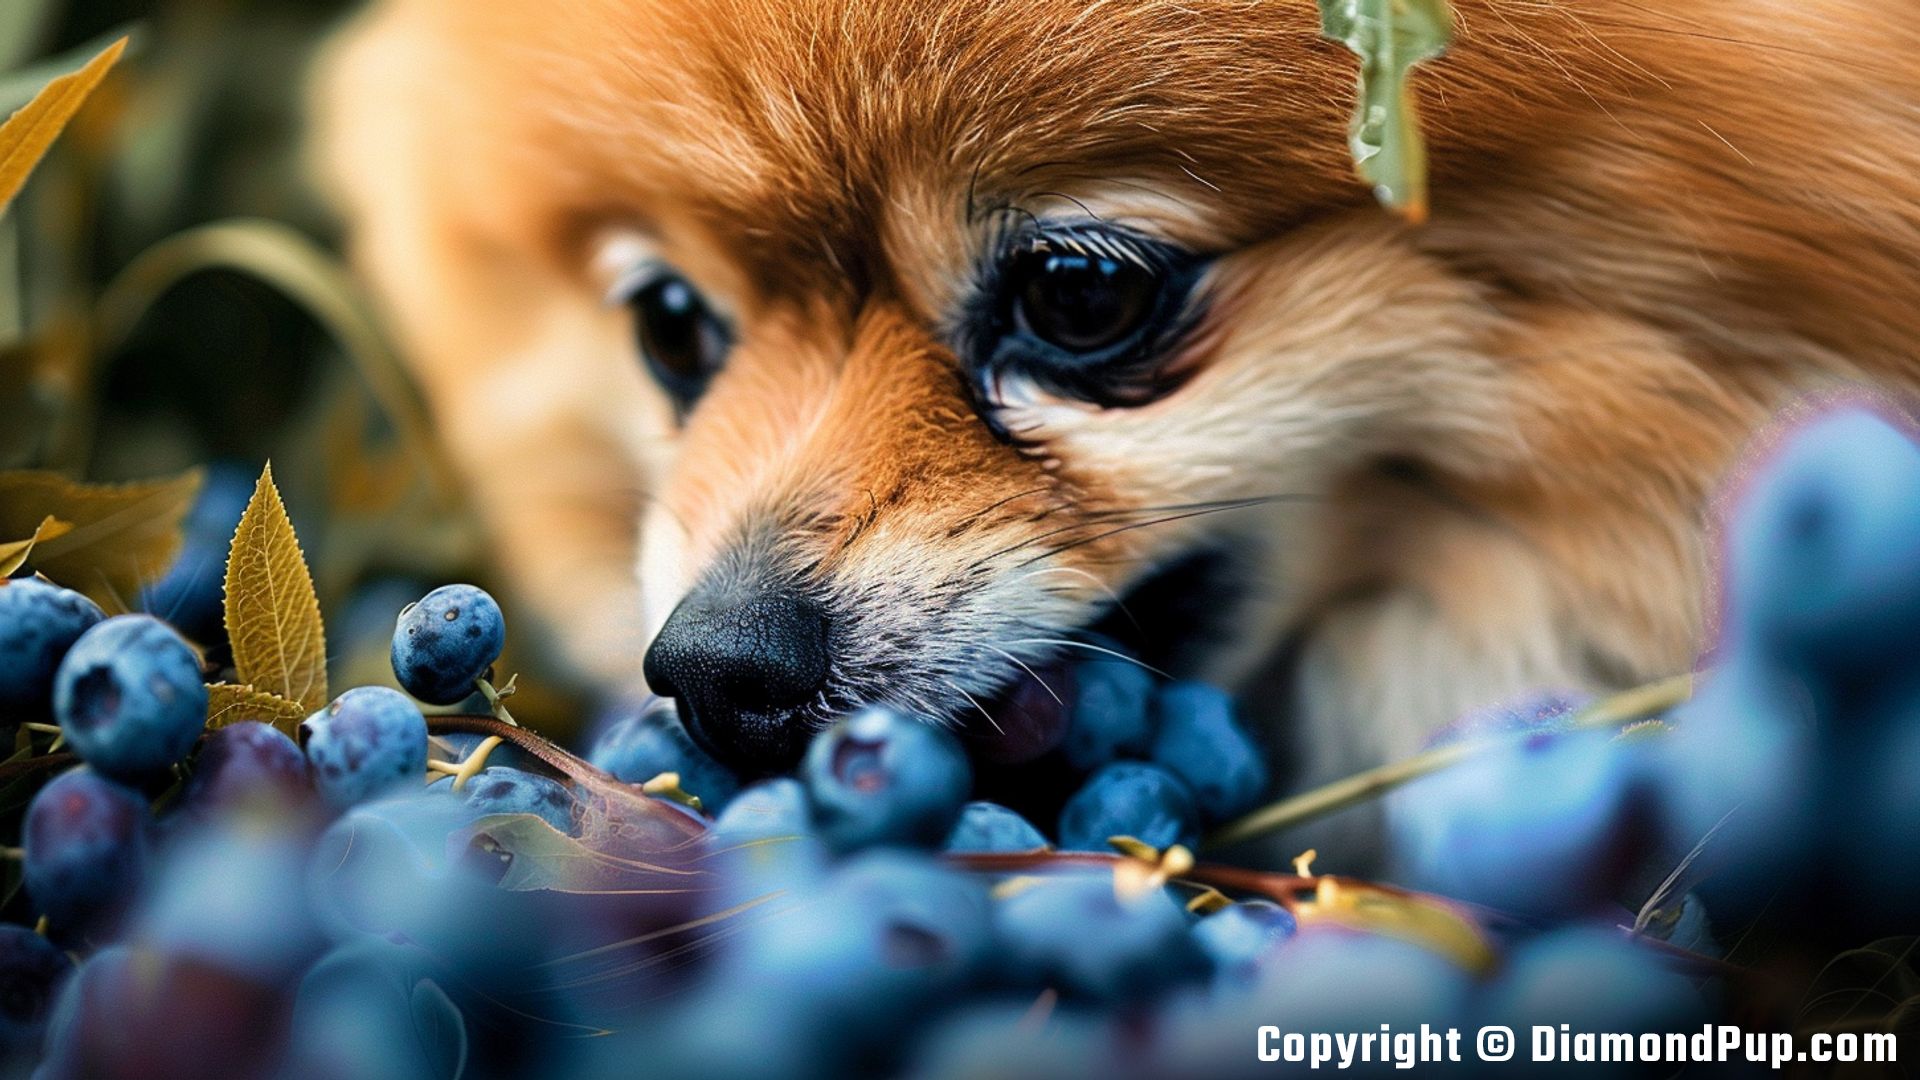 Image of a Cute Pomeranian Eating Blueberries